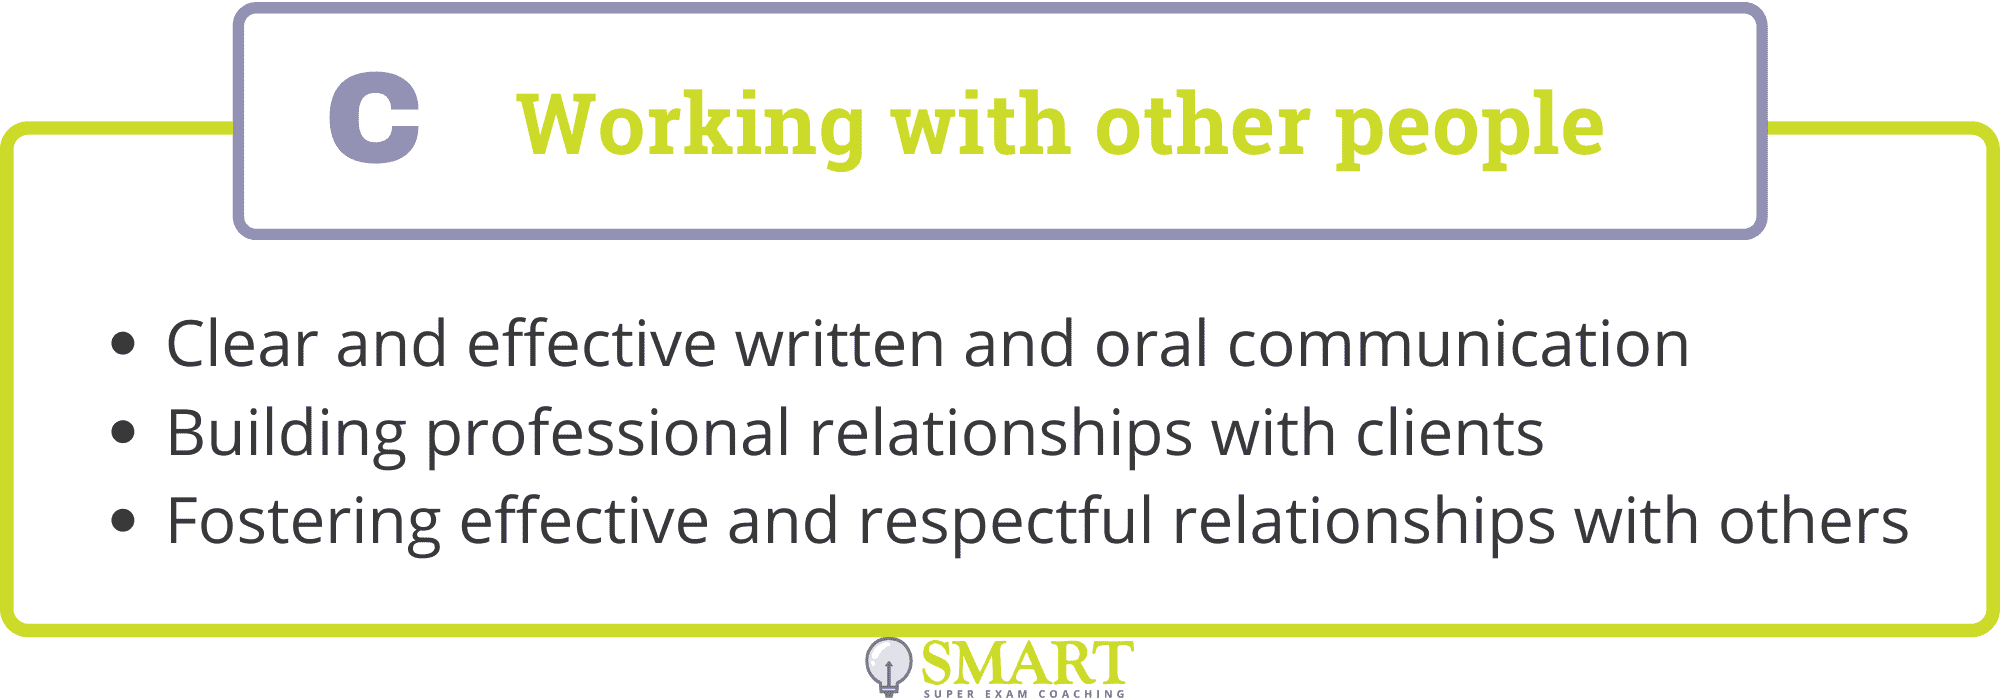 C Competencies: Working with Other People